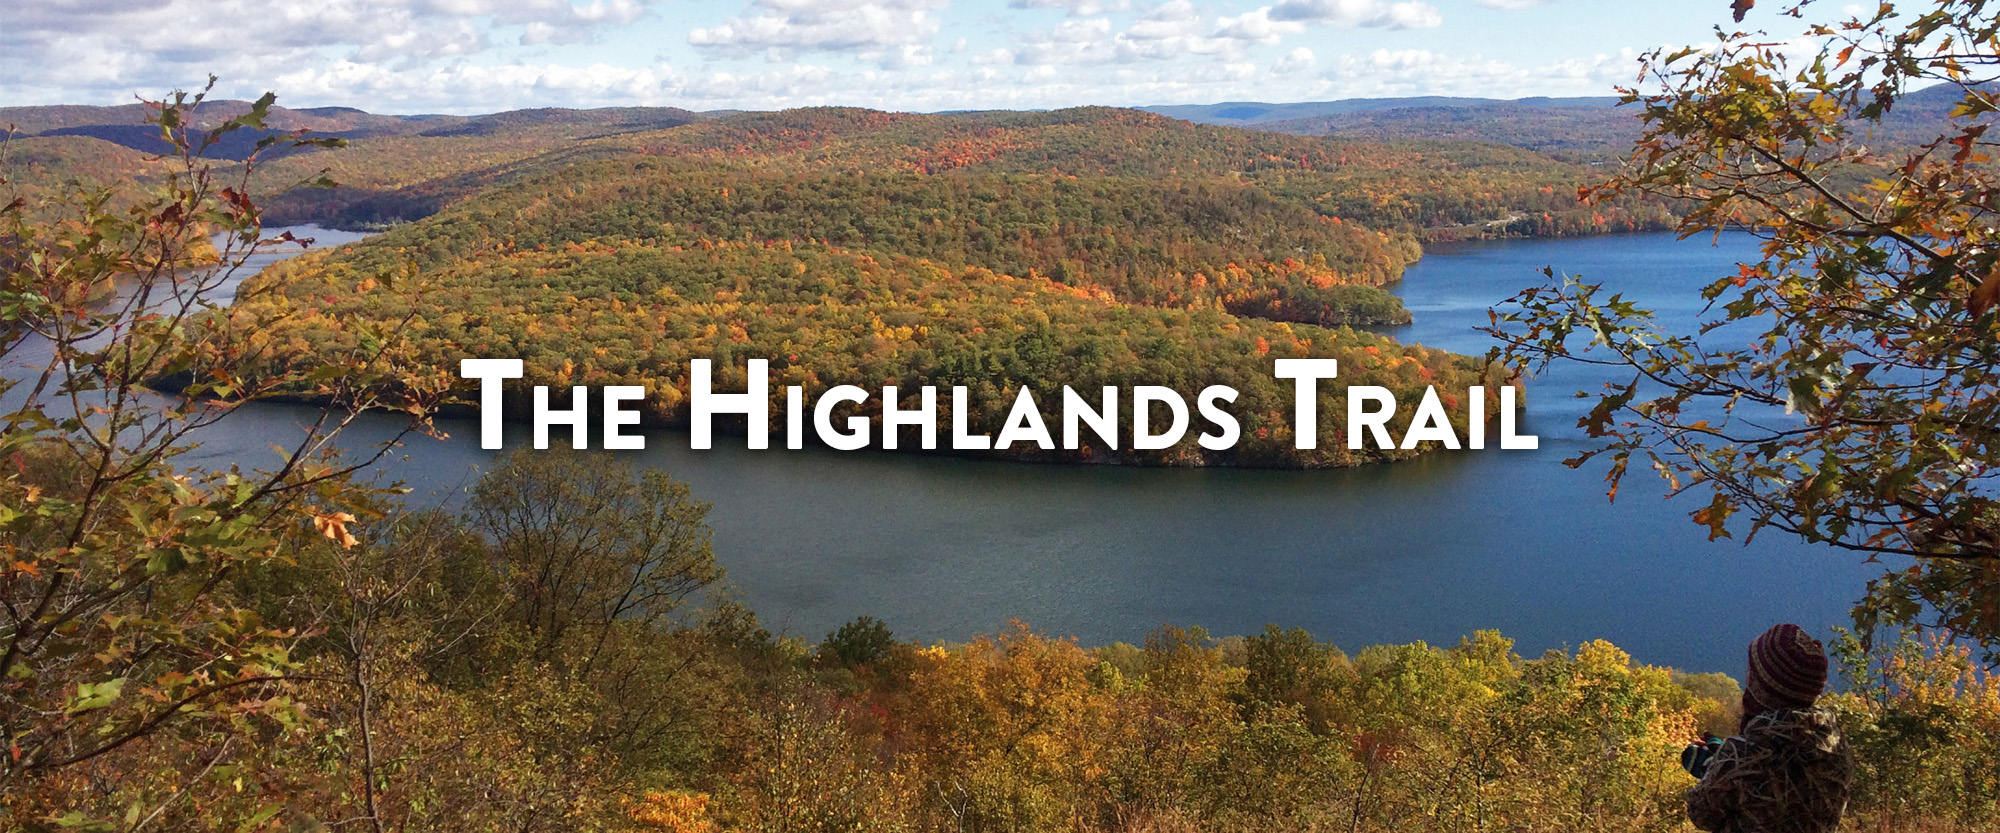 The Highlands Trail